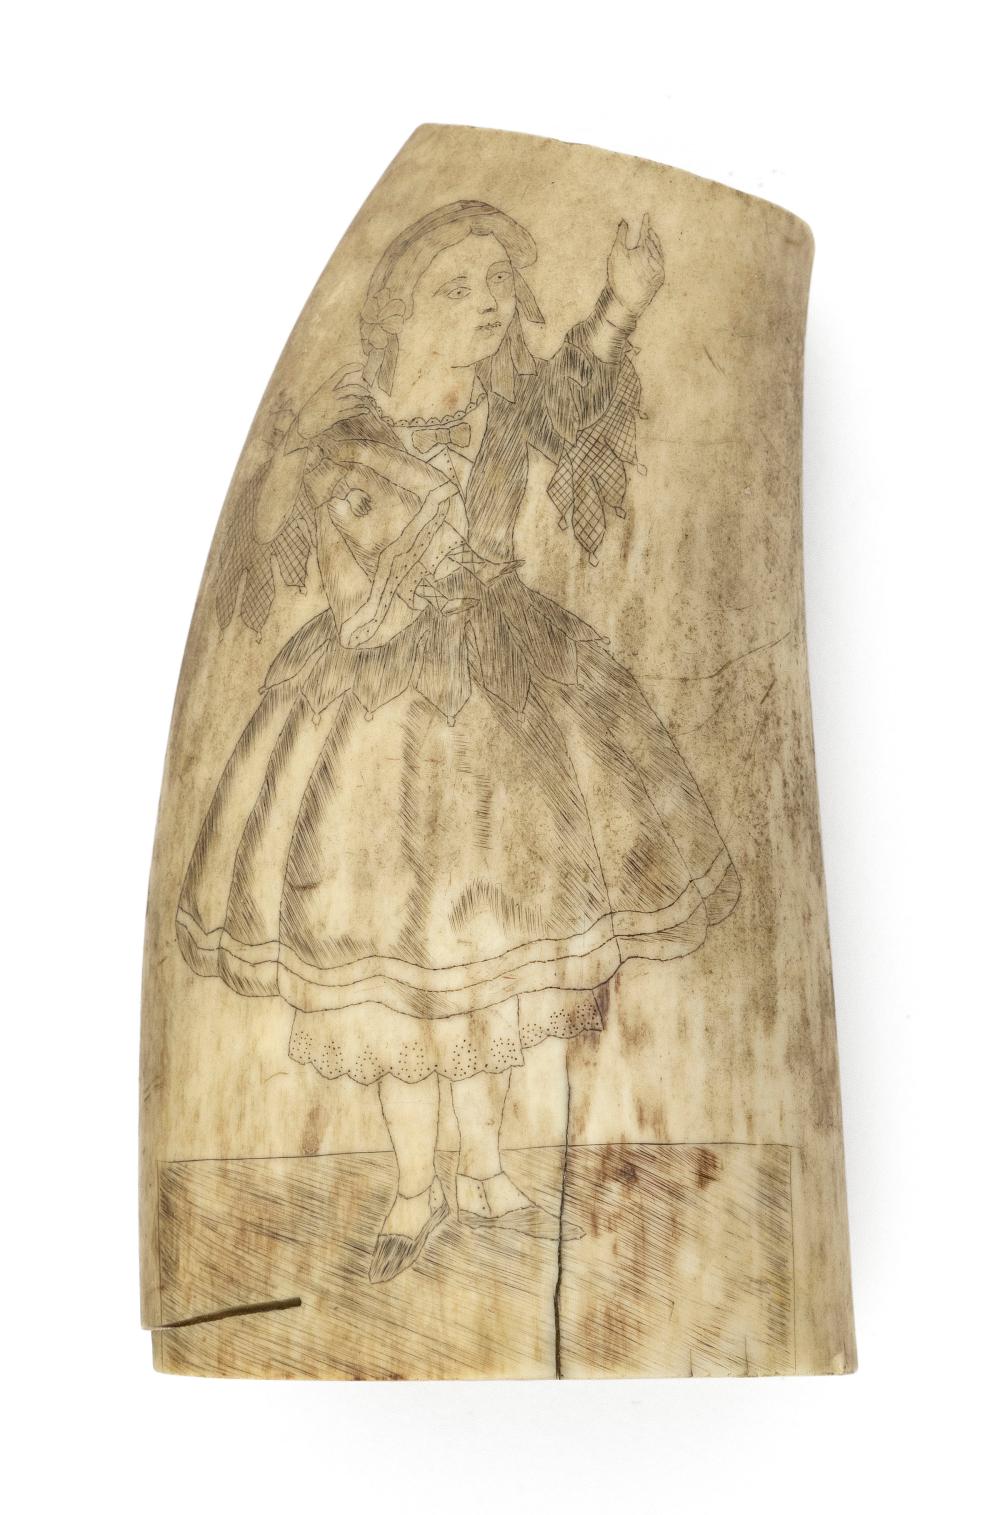 SCRIMSHAW WHALE'S TOOTH 19TH CENTURY